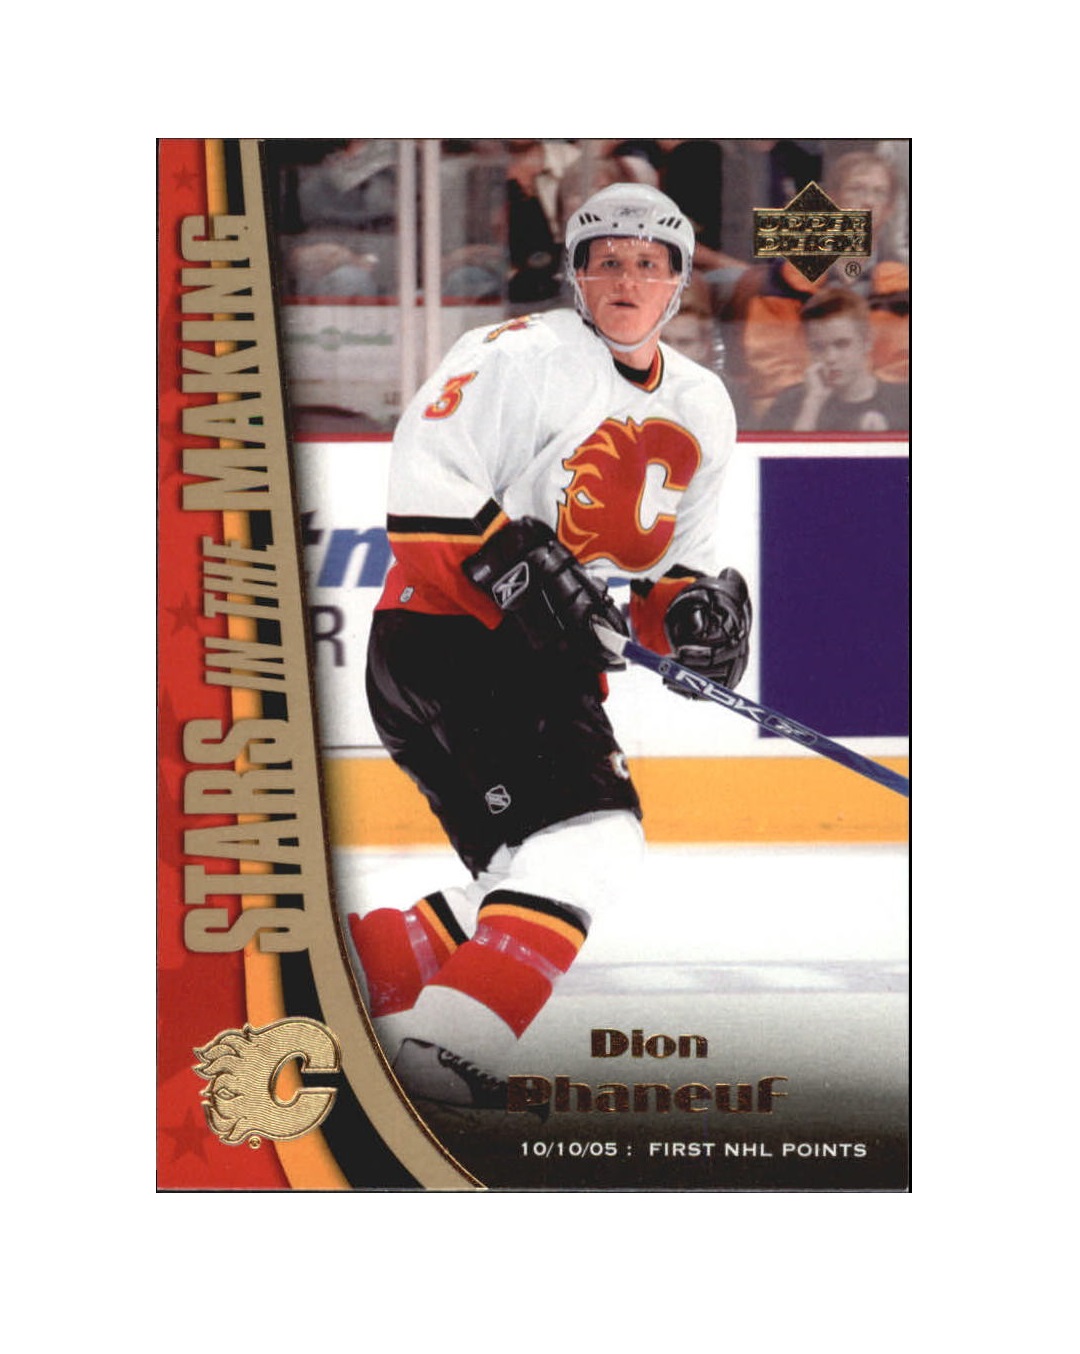 2005-06 Upper Deck Stars in the Making #SM8 Dion Phaneuf (10-X191-FLAMES)